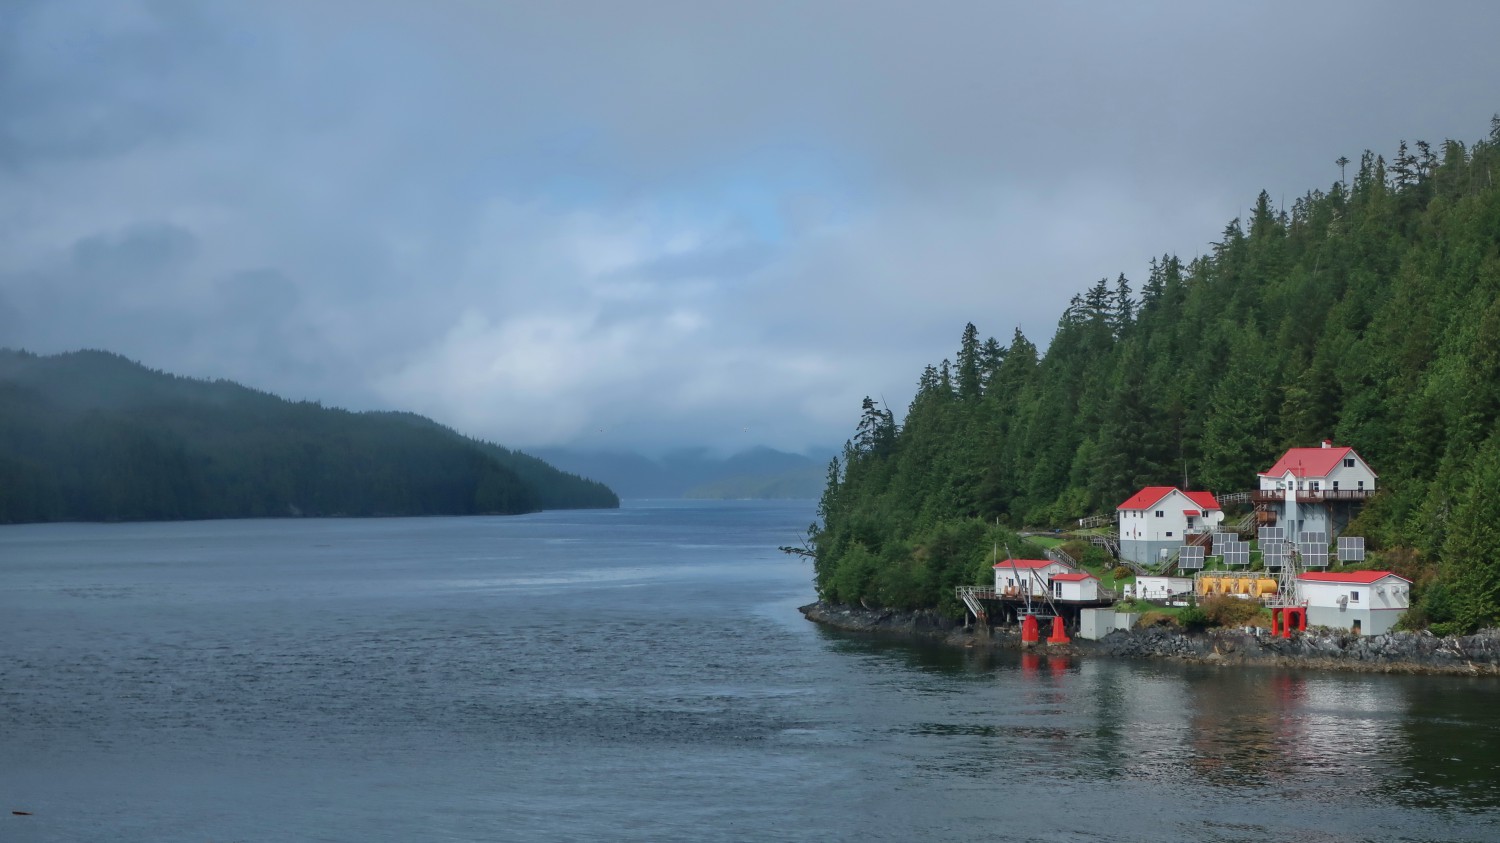 Boat Bluff Lighthouses which are located half the way between Prince Rupert and Port Hardy / Vancouver Island